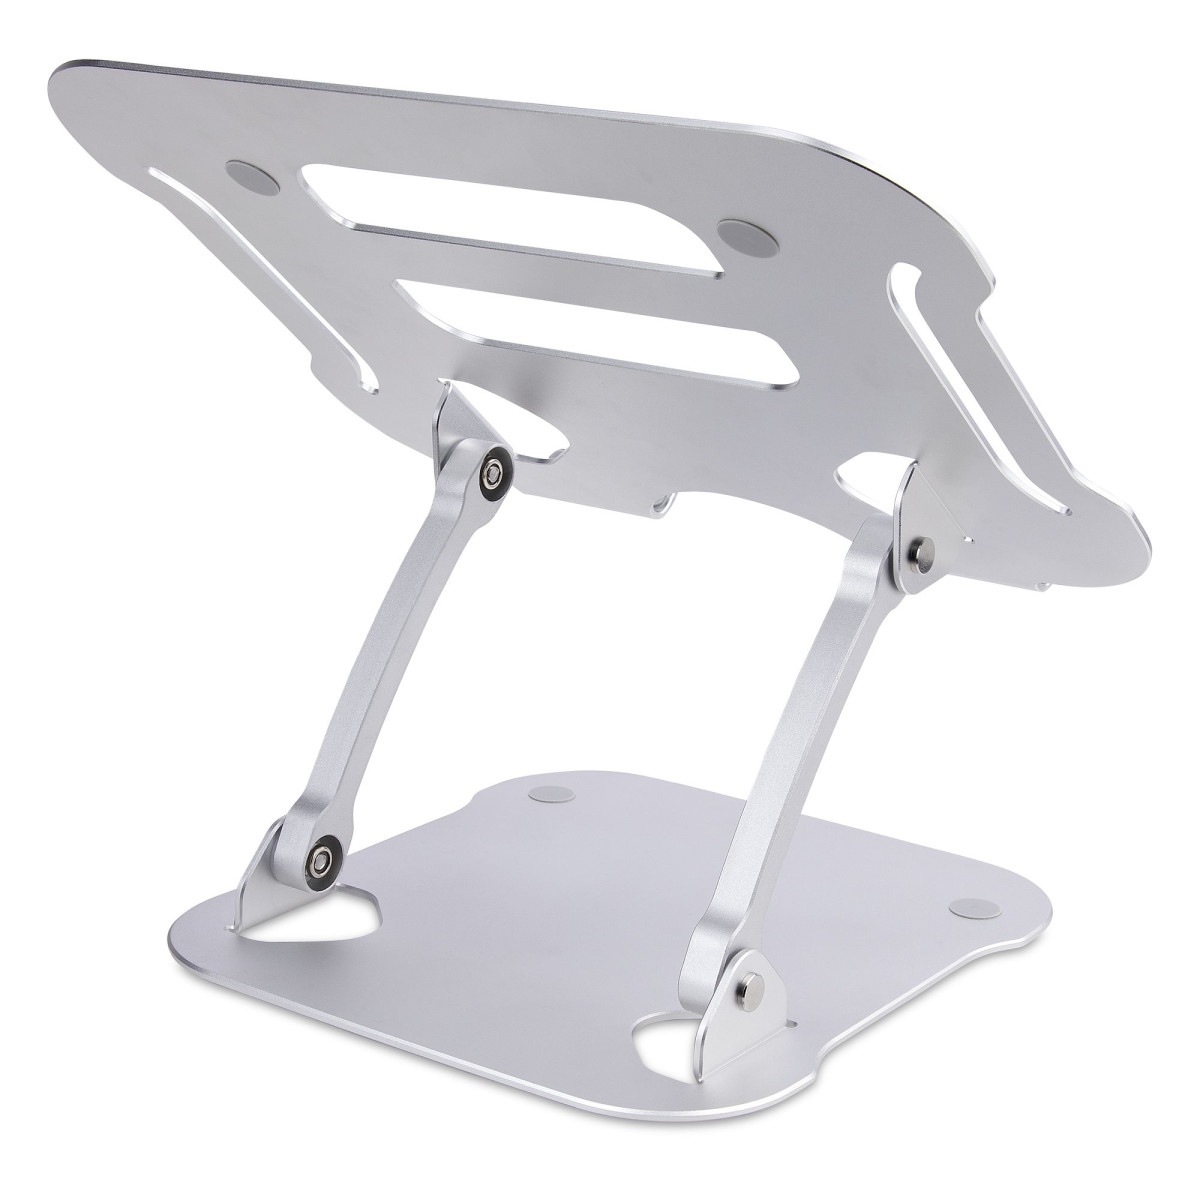 Laptop Stand For Desk Adjustable Height